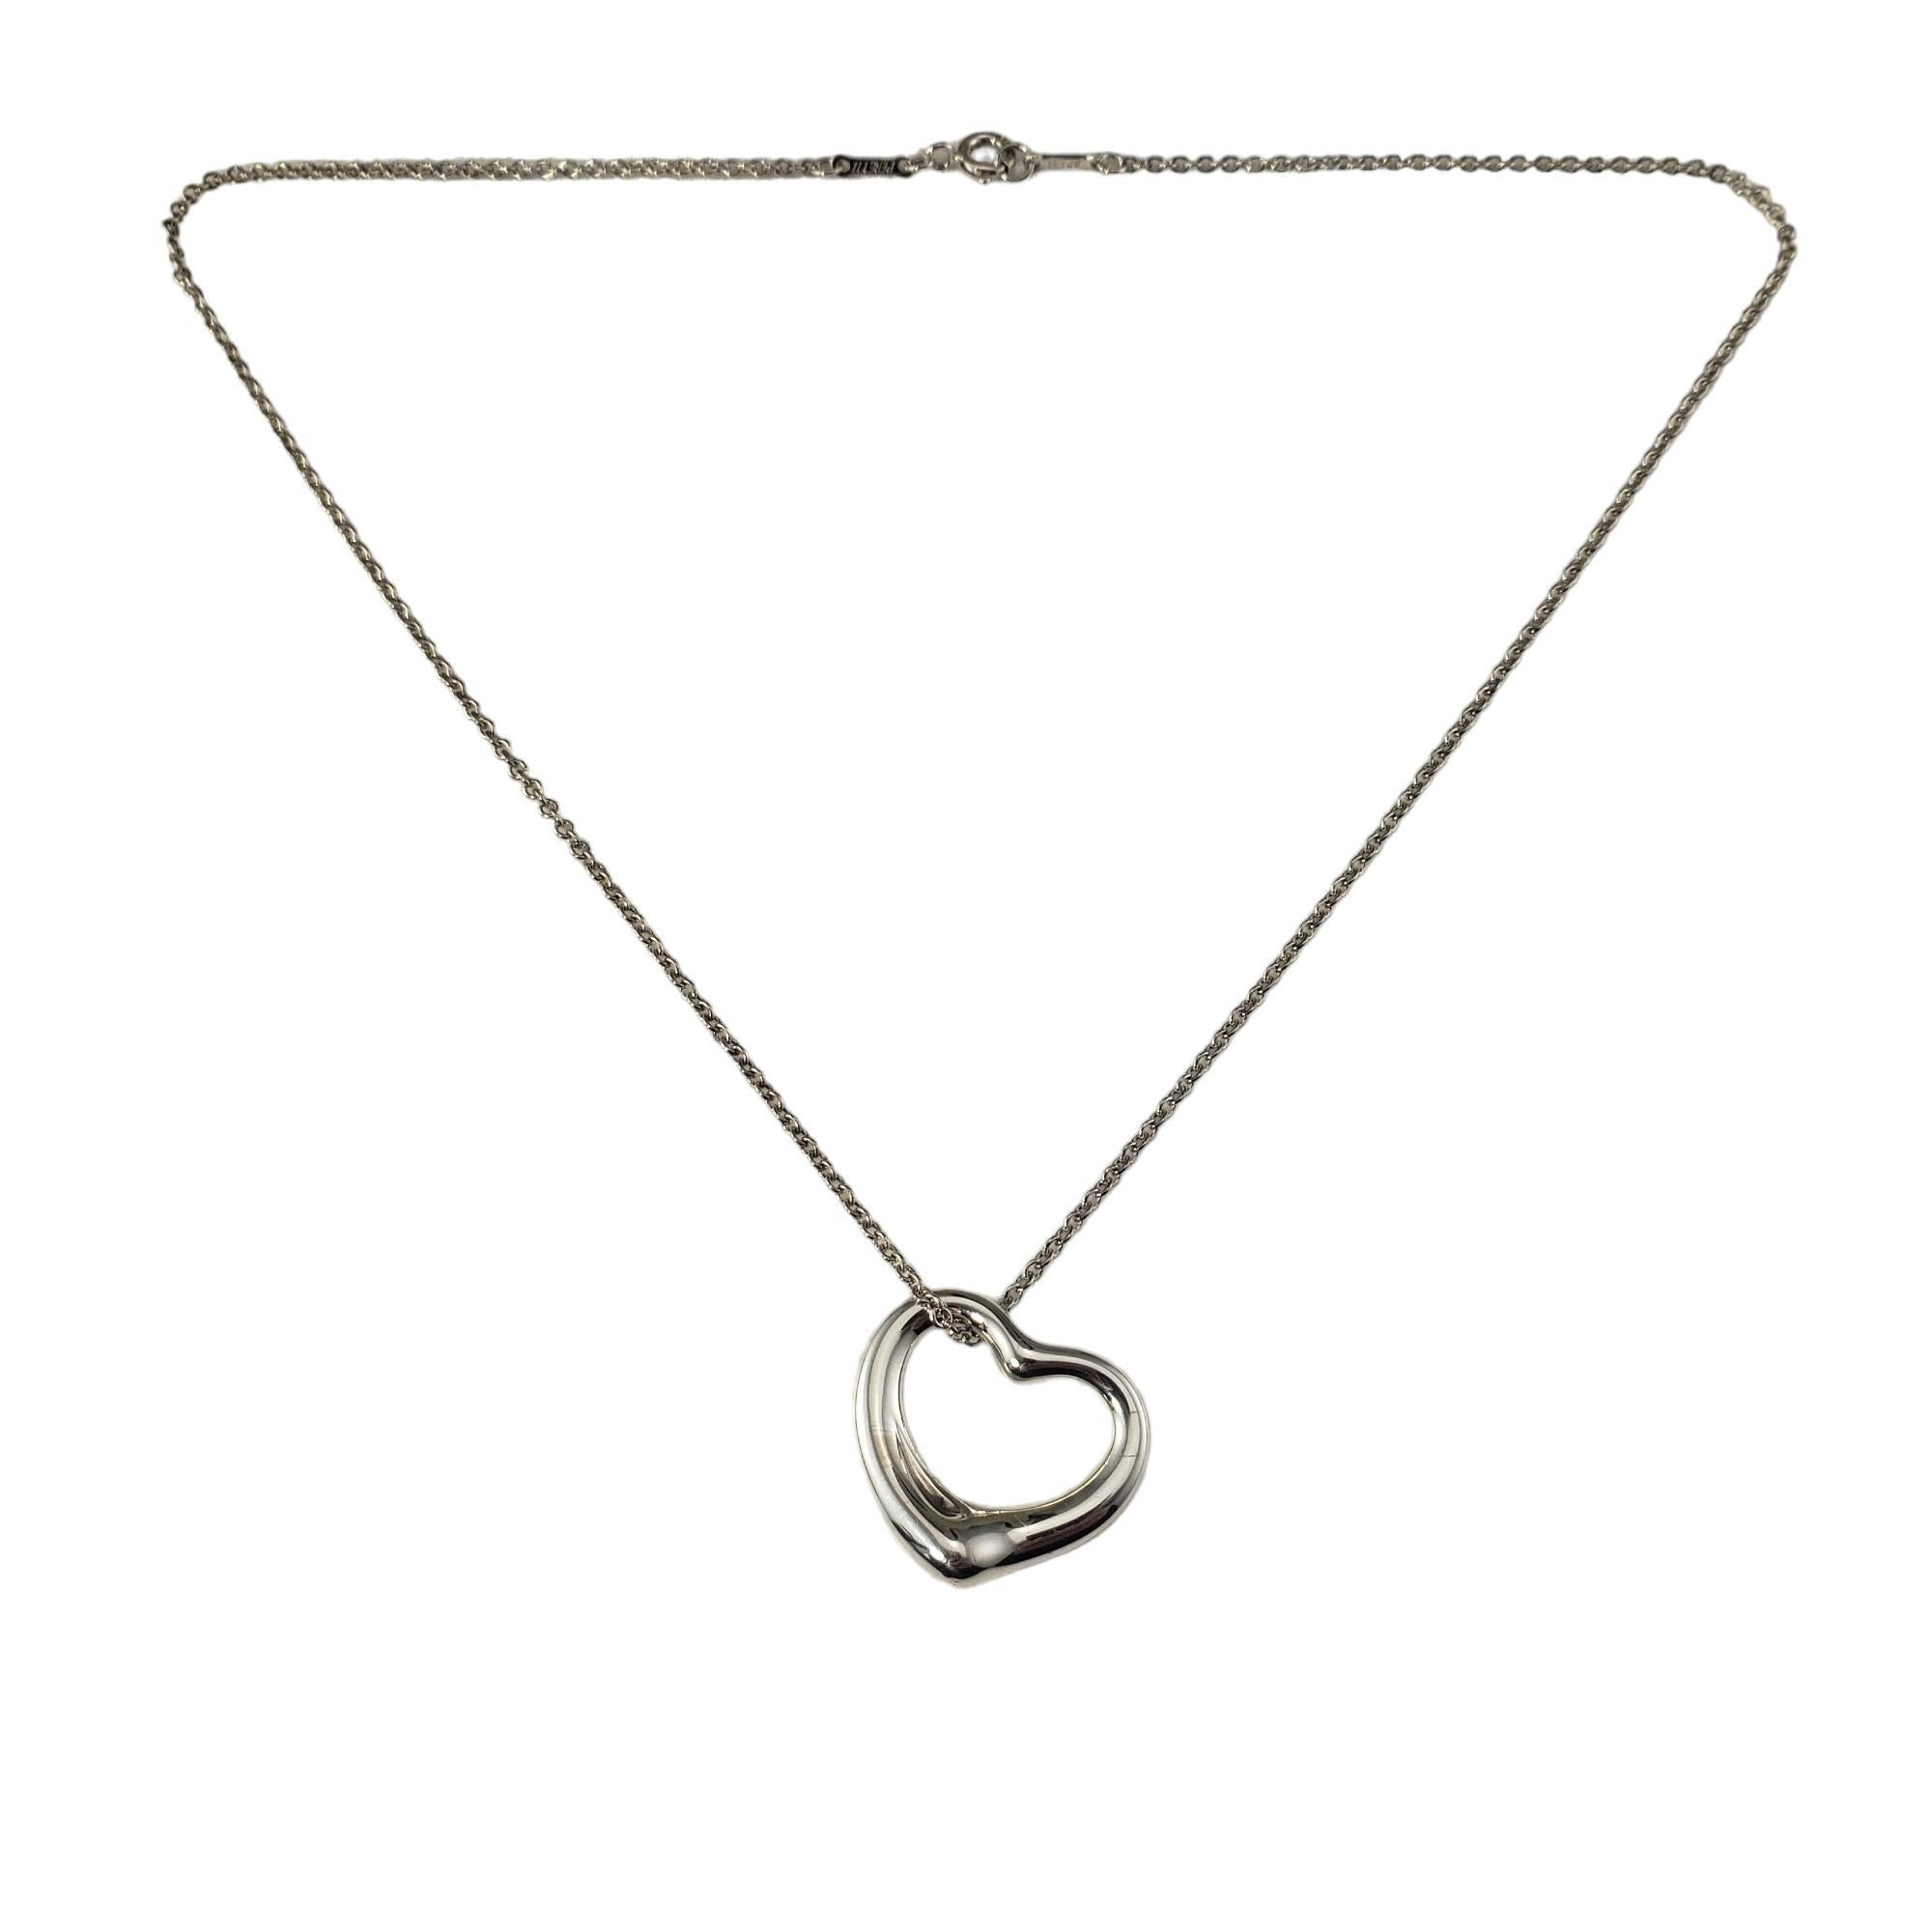 Tiffany & Co. Elsa Peretti Sterling Silver Open Heart Necklace

This elegant open heart pendant necklace is crafted in beautifully detailed sterling silver by Elsa Peretti for Tiffany & Co.

Size: 20 mm x 20 mm (pendant)
         16 inches